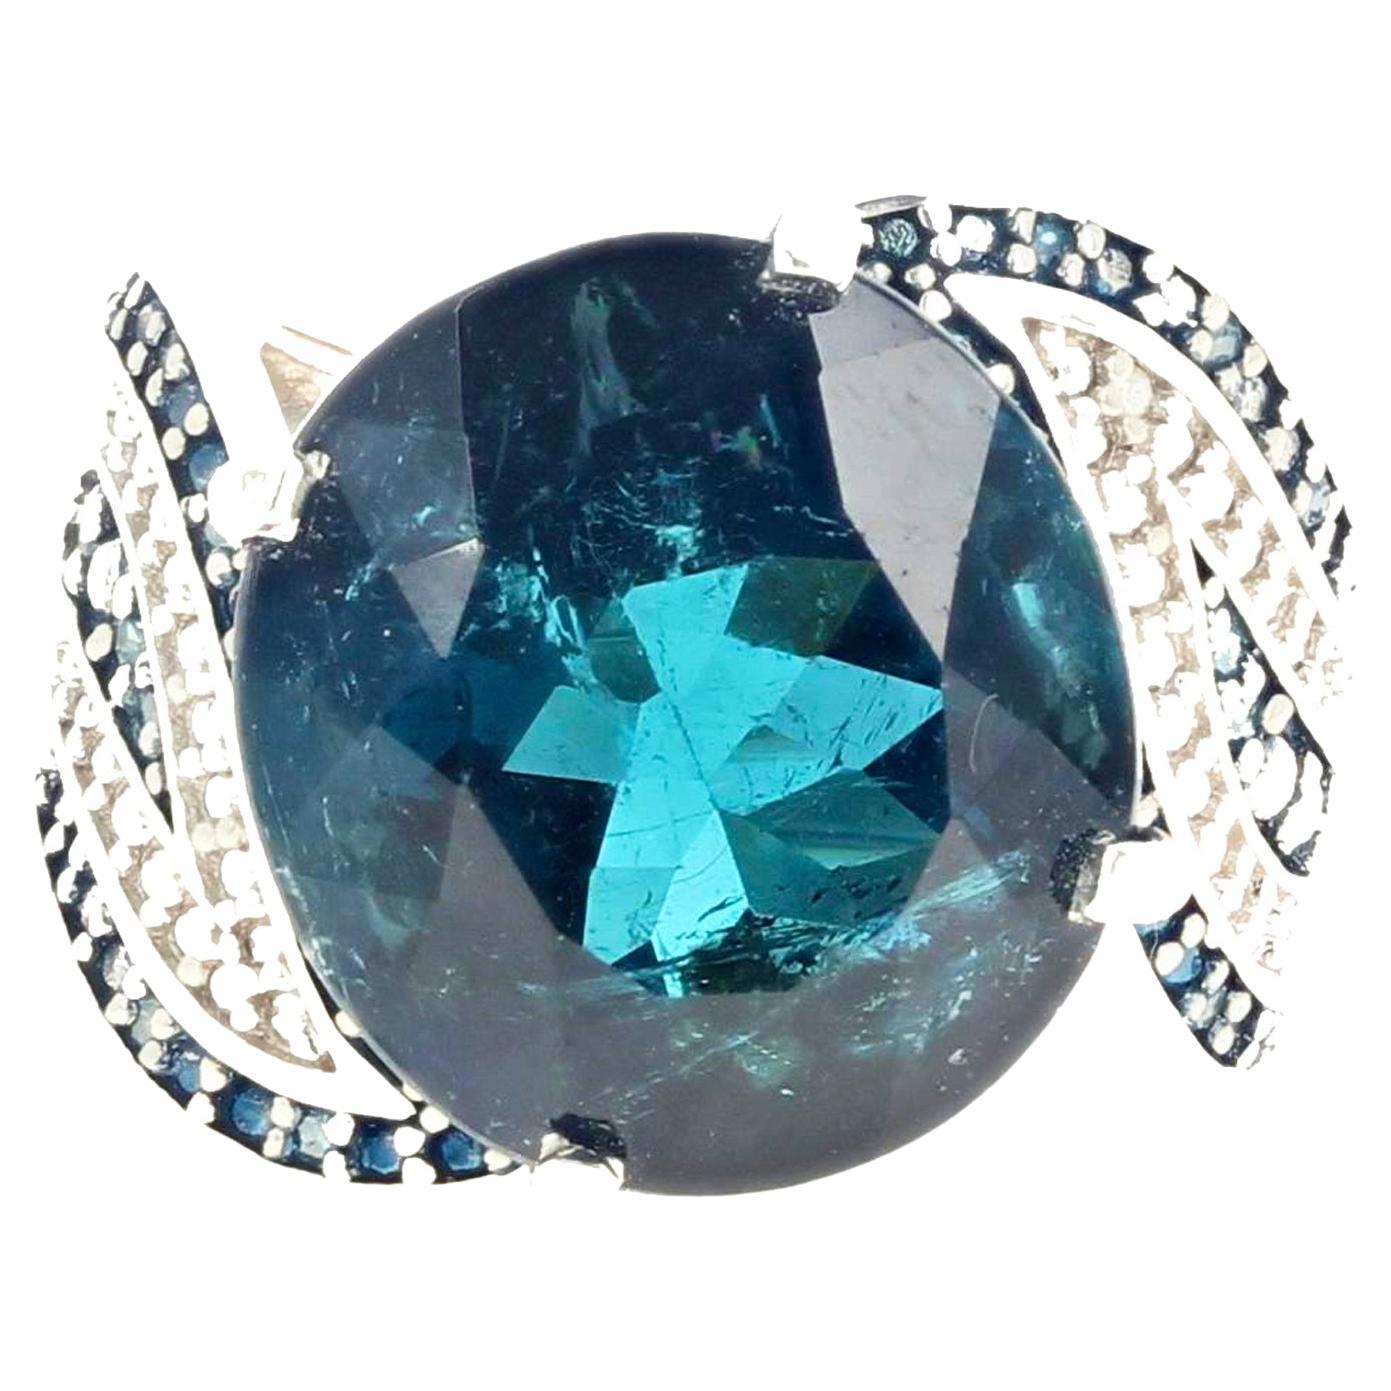 This magnificent super-elegant 17.7 carat natural Indicolite (Blue) Tourmaline is 17mm x 15.4mm enhanced with very dark blue and white tiny little diamonds set in a sterling silver rhodium plated ring size 8 sizable (we size for free).  It is